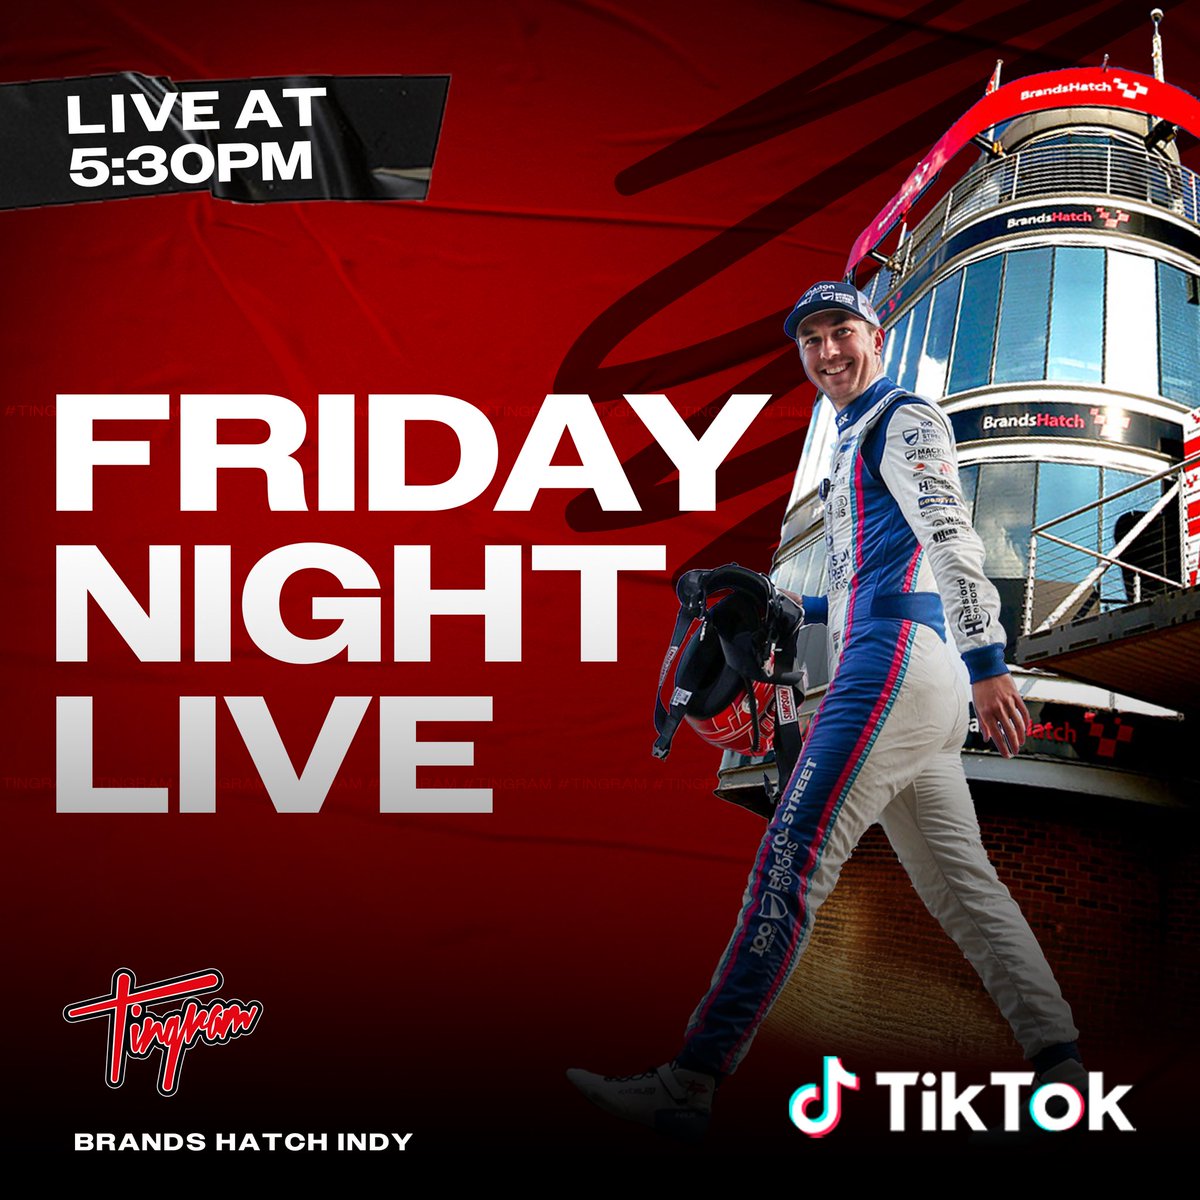 It’s nearly that time again! Friday Night Live at Half Five! 😀 Join us on TikTok at 5:30pm! #tingram #BrandsHatchIndy #BTCC #live